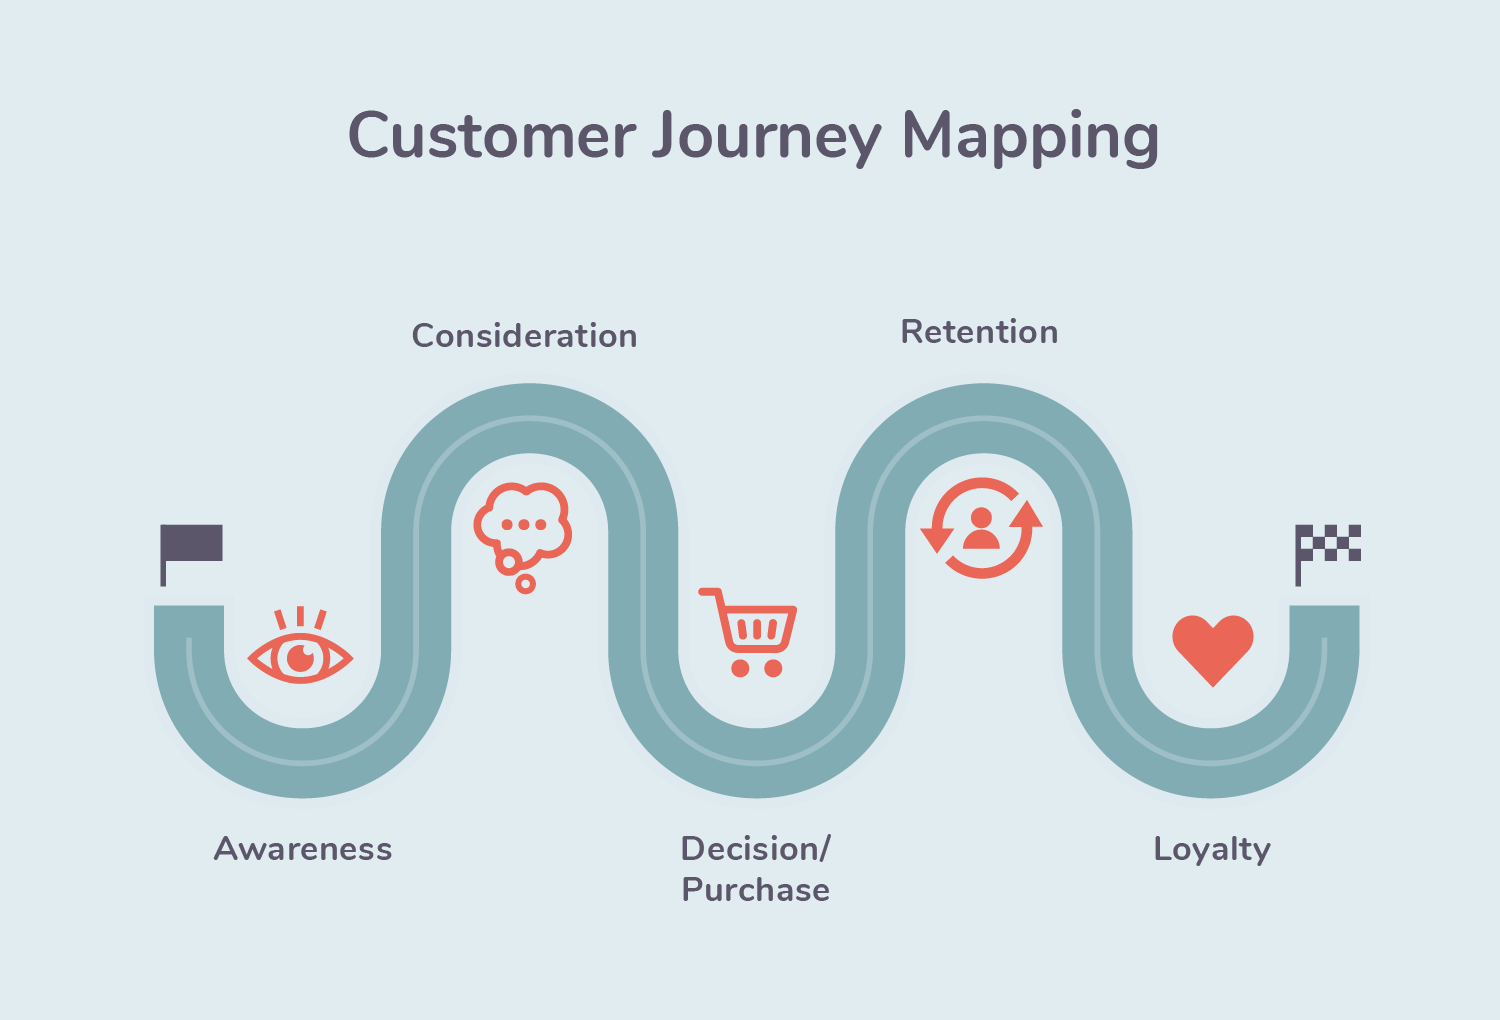 Customer Journey Mapping